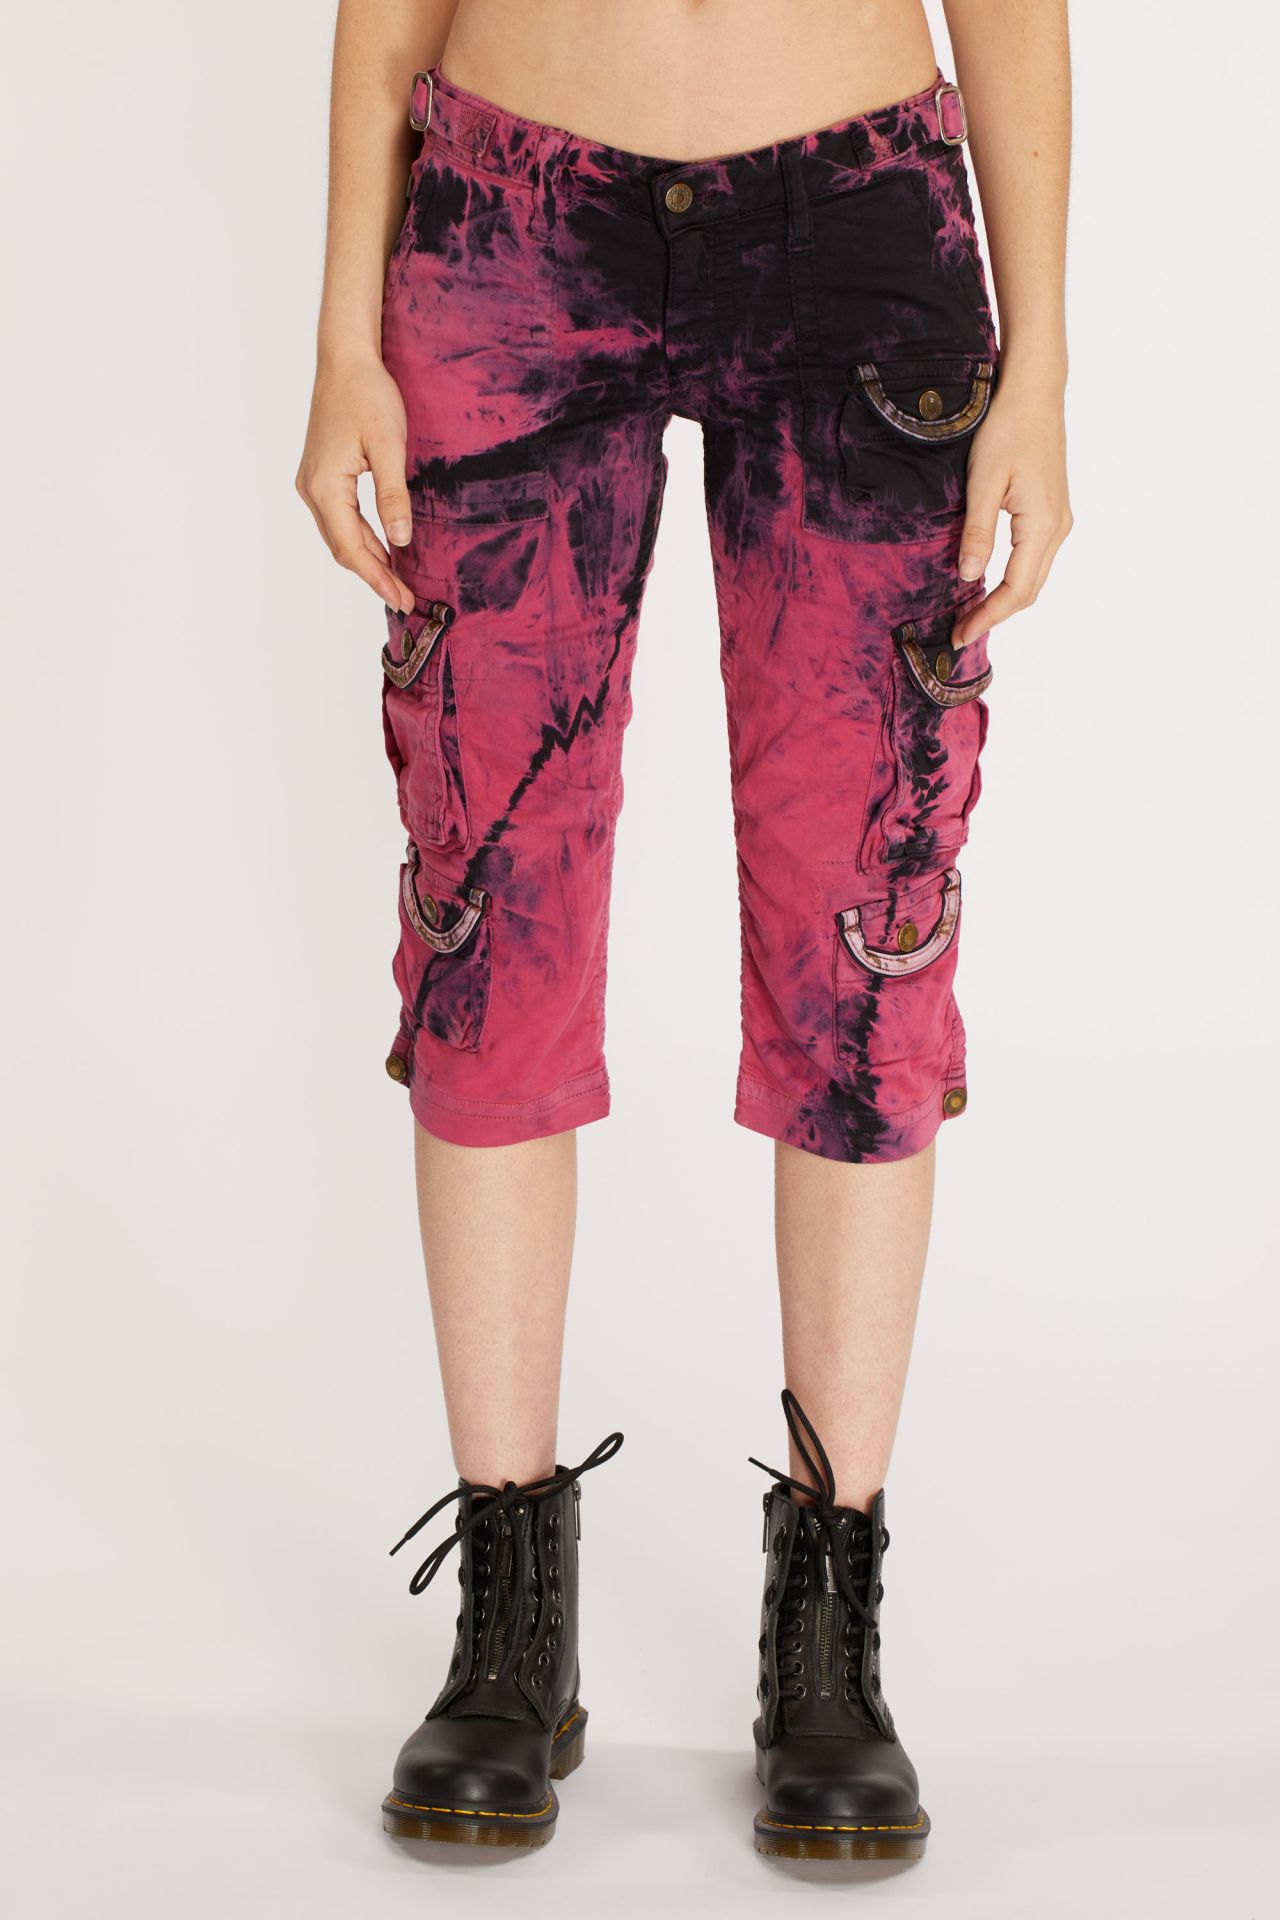 præcedens bestøve Knurre MILITARY STYLE WOMENS CARGO SHORTS IN TYE DYE PINK AND BLACK WASH